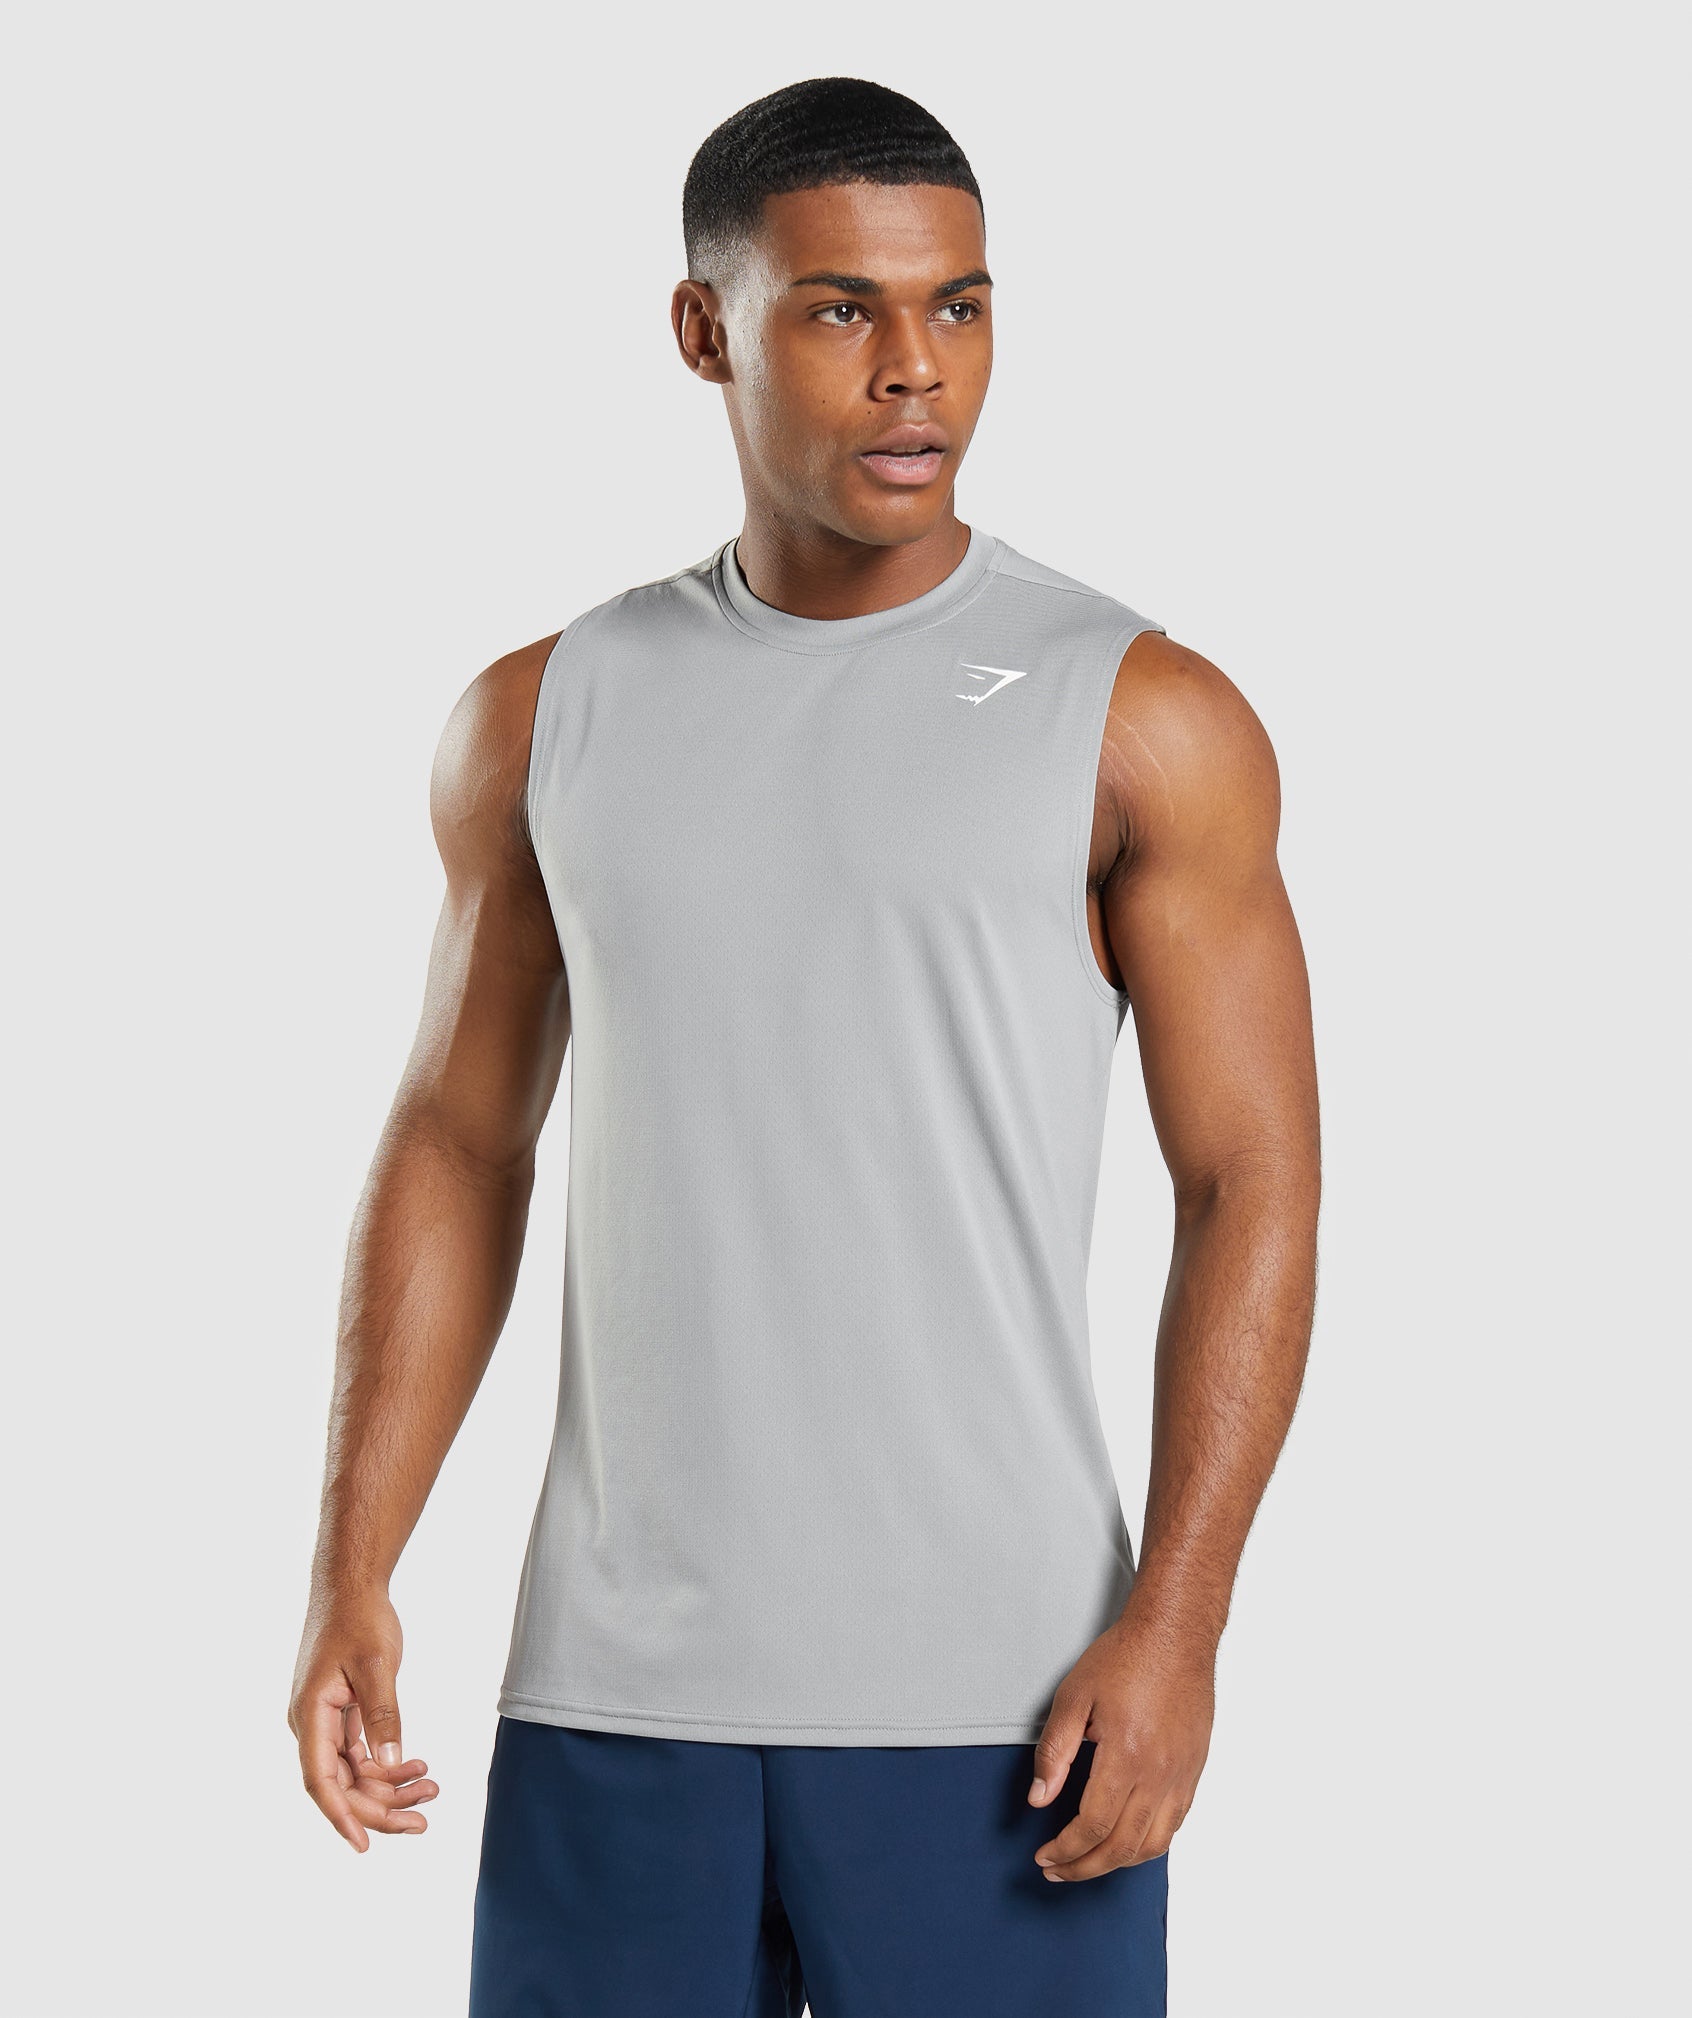 Arrival Sleeveless T-Shirt in Smokey Grey - view 1